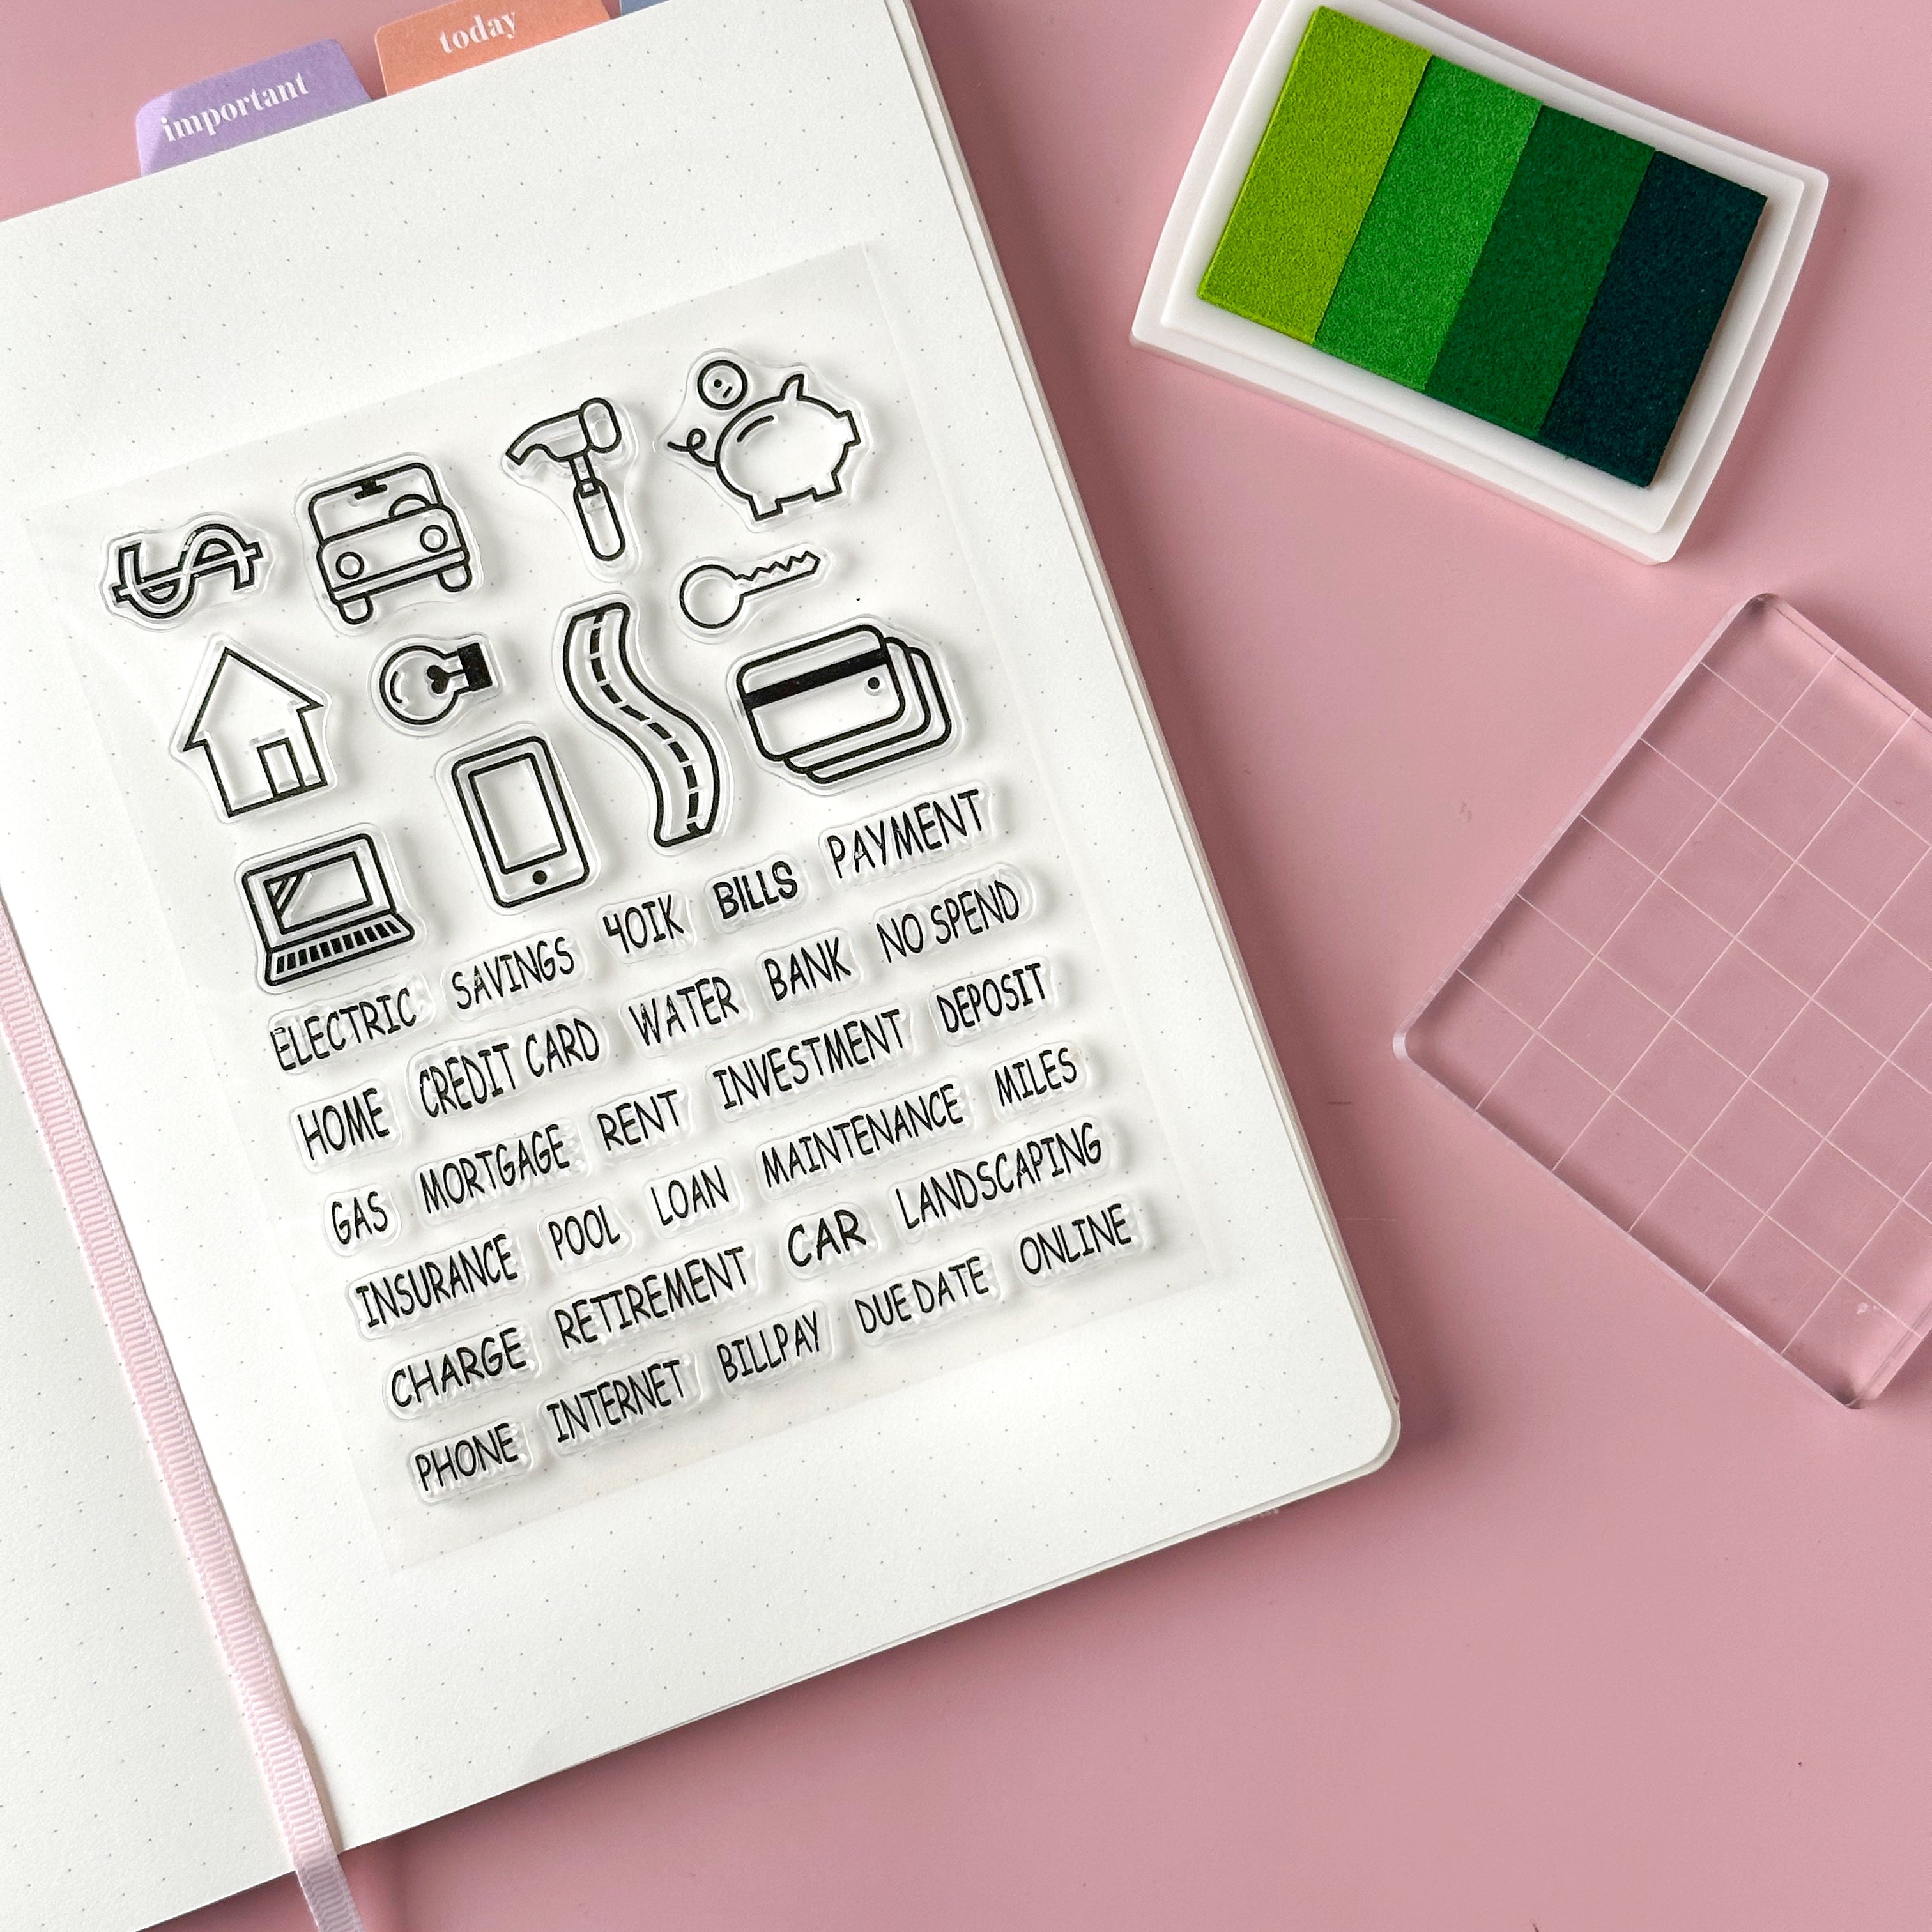 Achieve your financial goals with our specialized BUJO stamps, designed to streamline budgeting and financial planning in your bullet journal, including stamps for income, expenses, budgets, and savings. This silicone stamp set is sold at BBB Supplies Craft Shop.